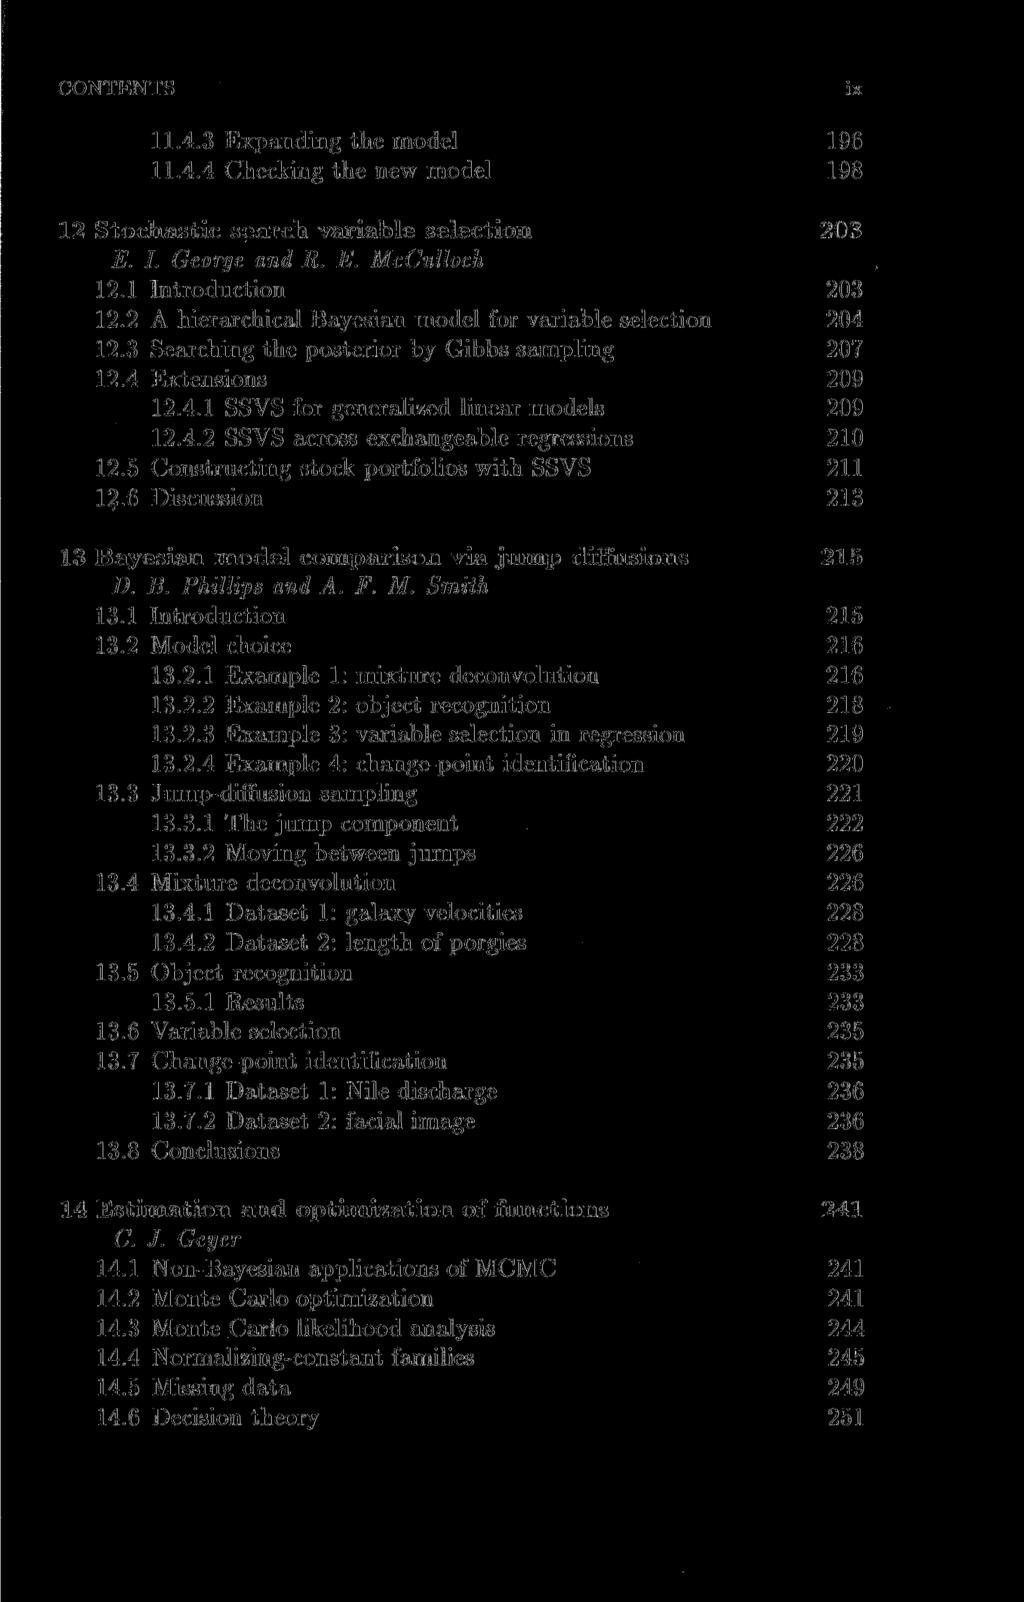 CONTENTS ix 11.4.3 Expanding the model 196 11.4.4 Checking the new model 198 12 Stochastic search variable selection 203 E. I. George and R. E. McCulloch 12.1 Introduction 203 12.